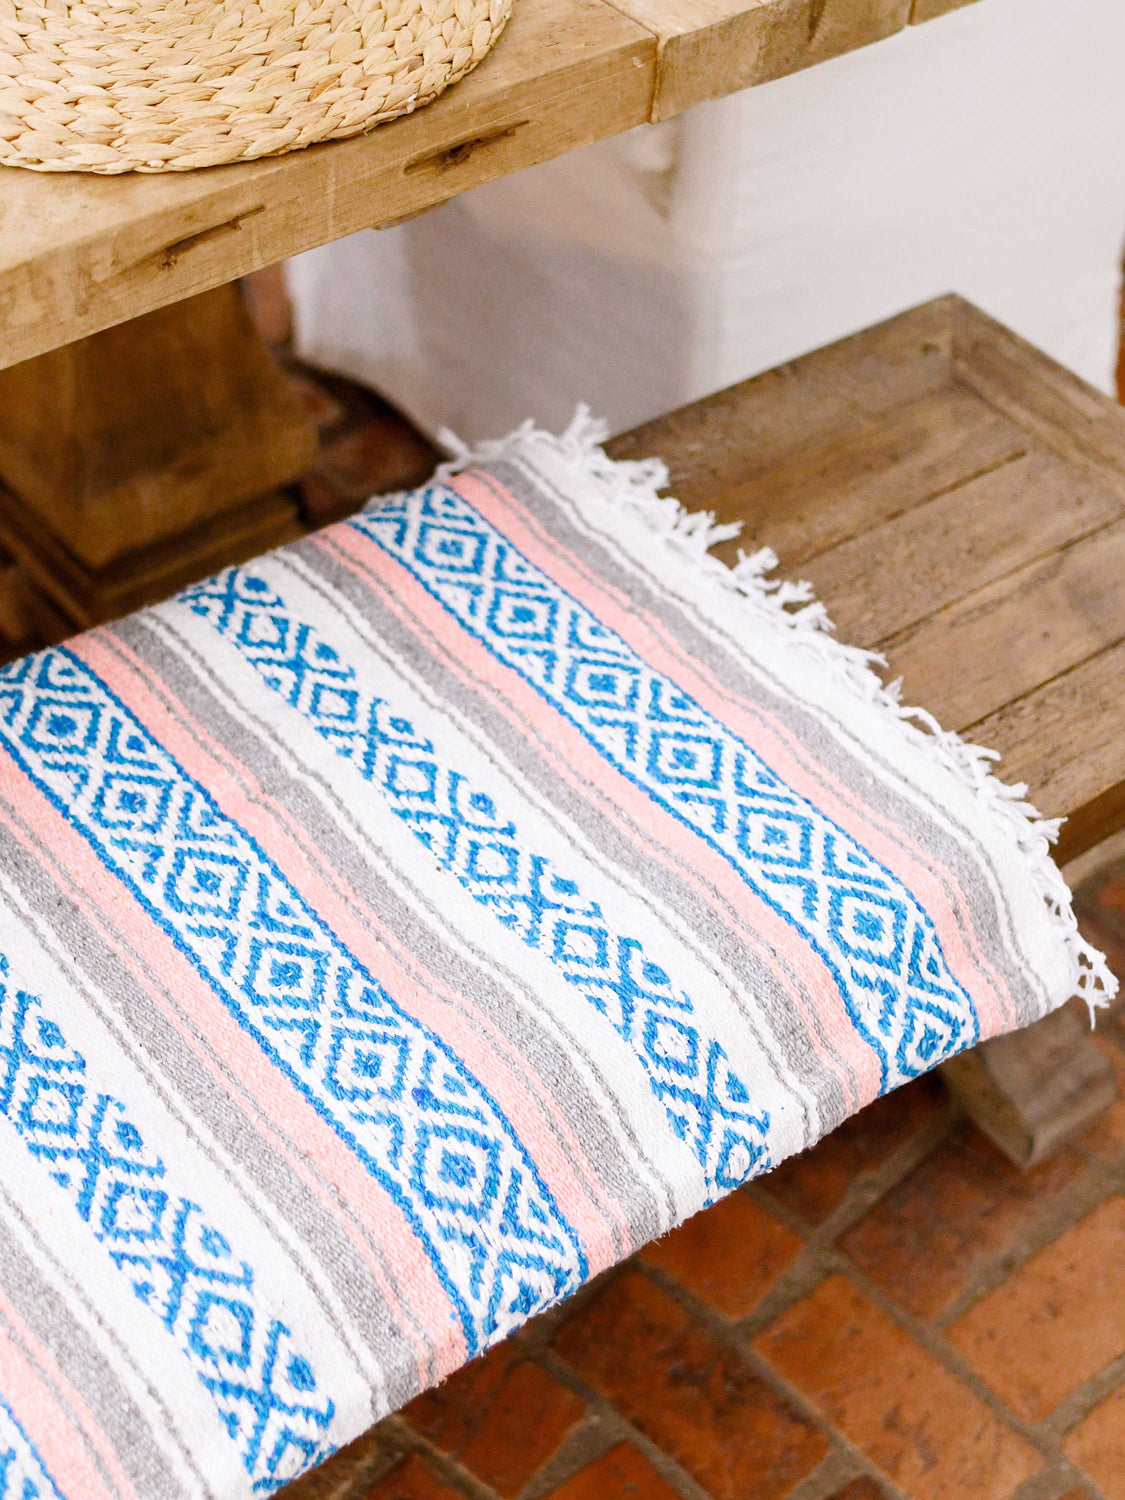 A blue, pink, and gray oversized Mexican blanket folded on a wooden bench. 